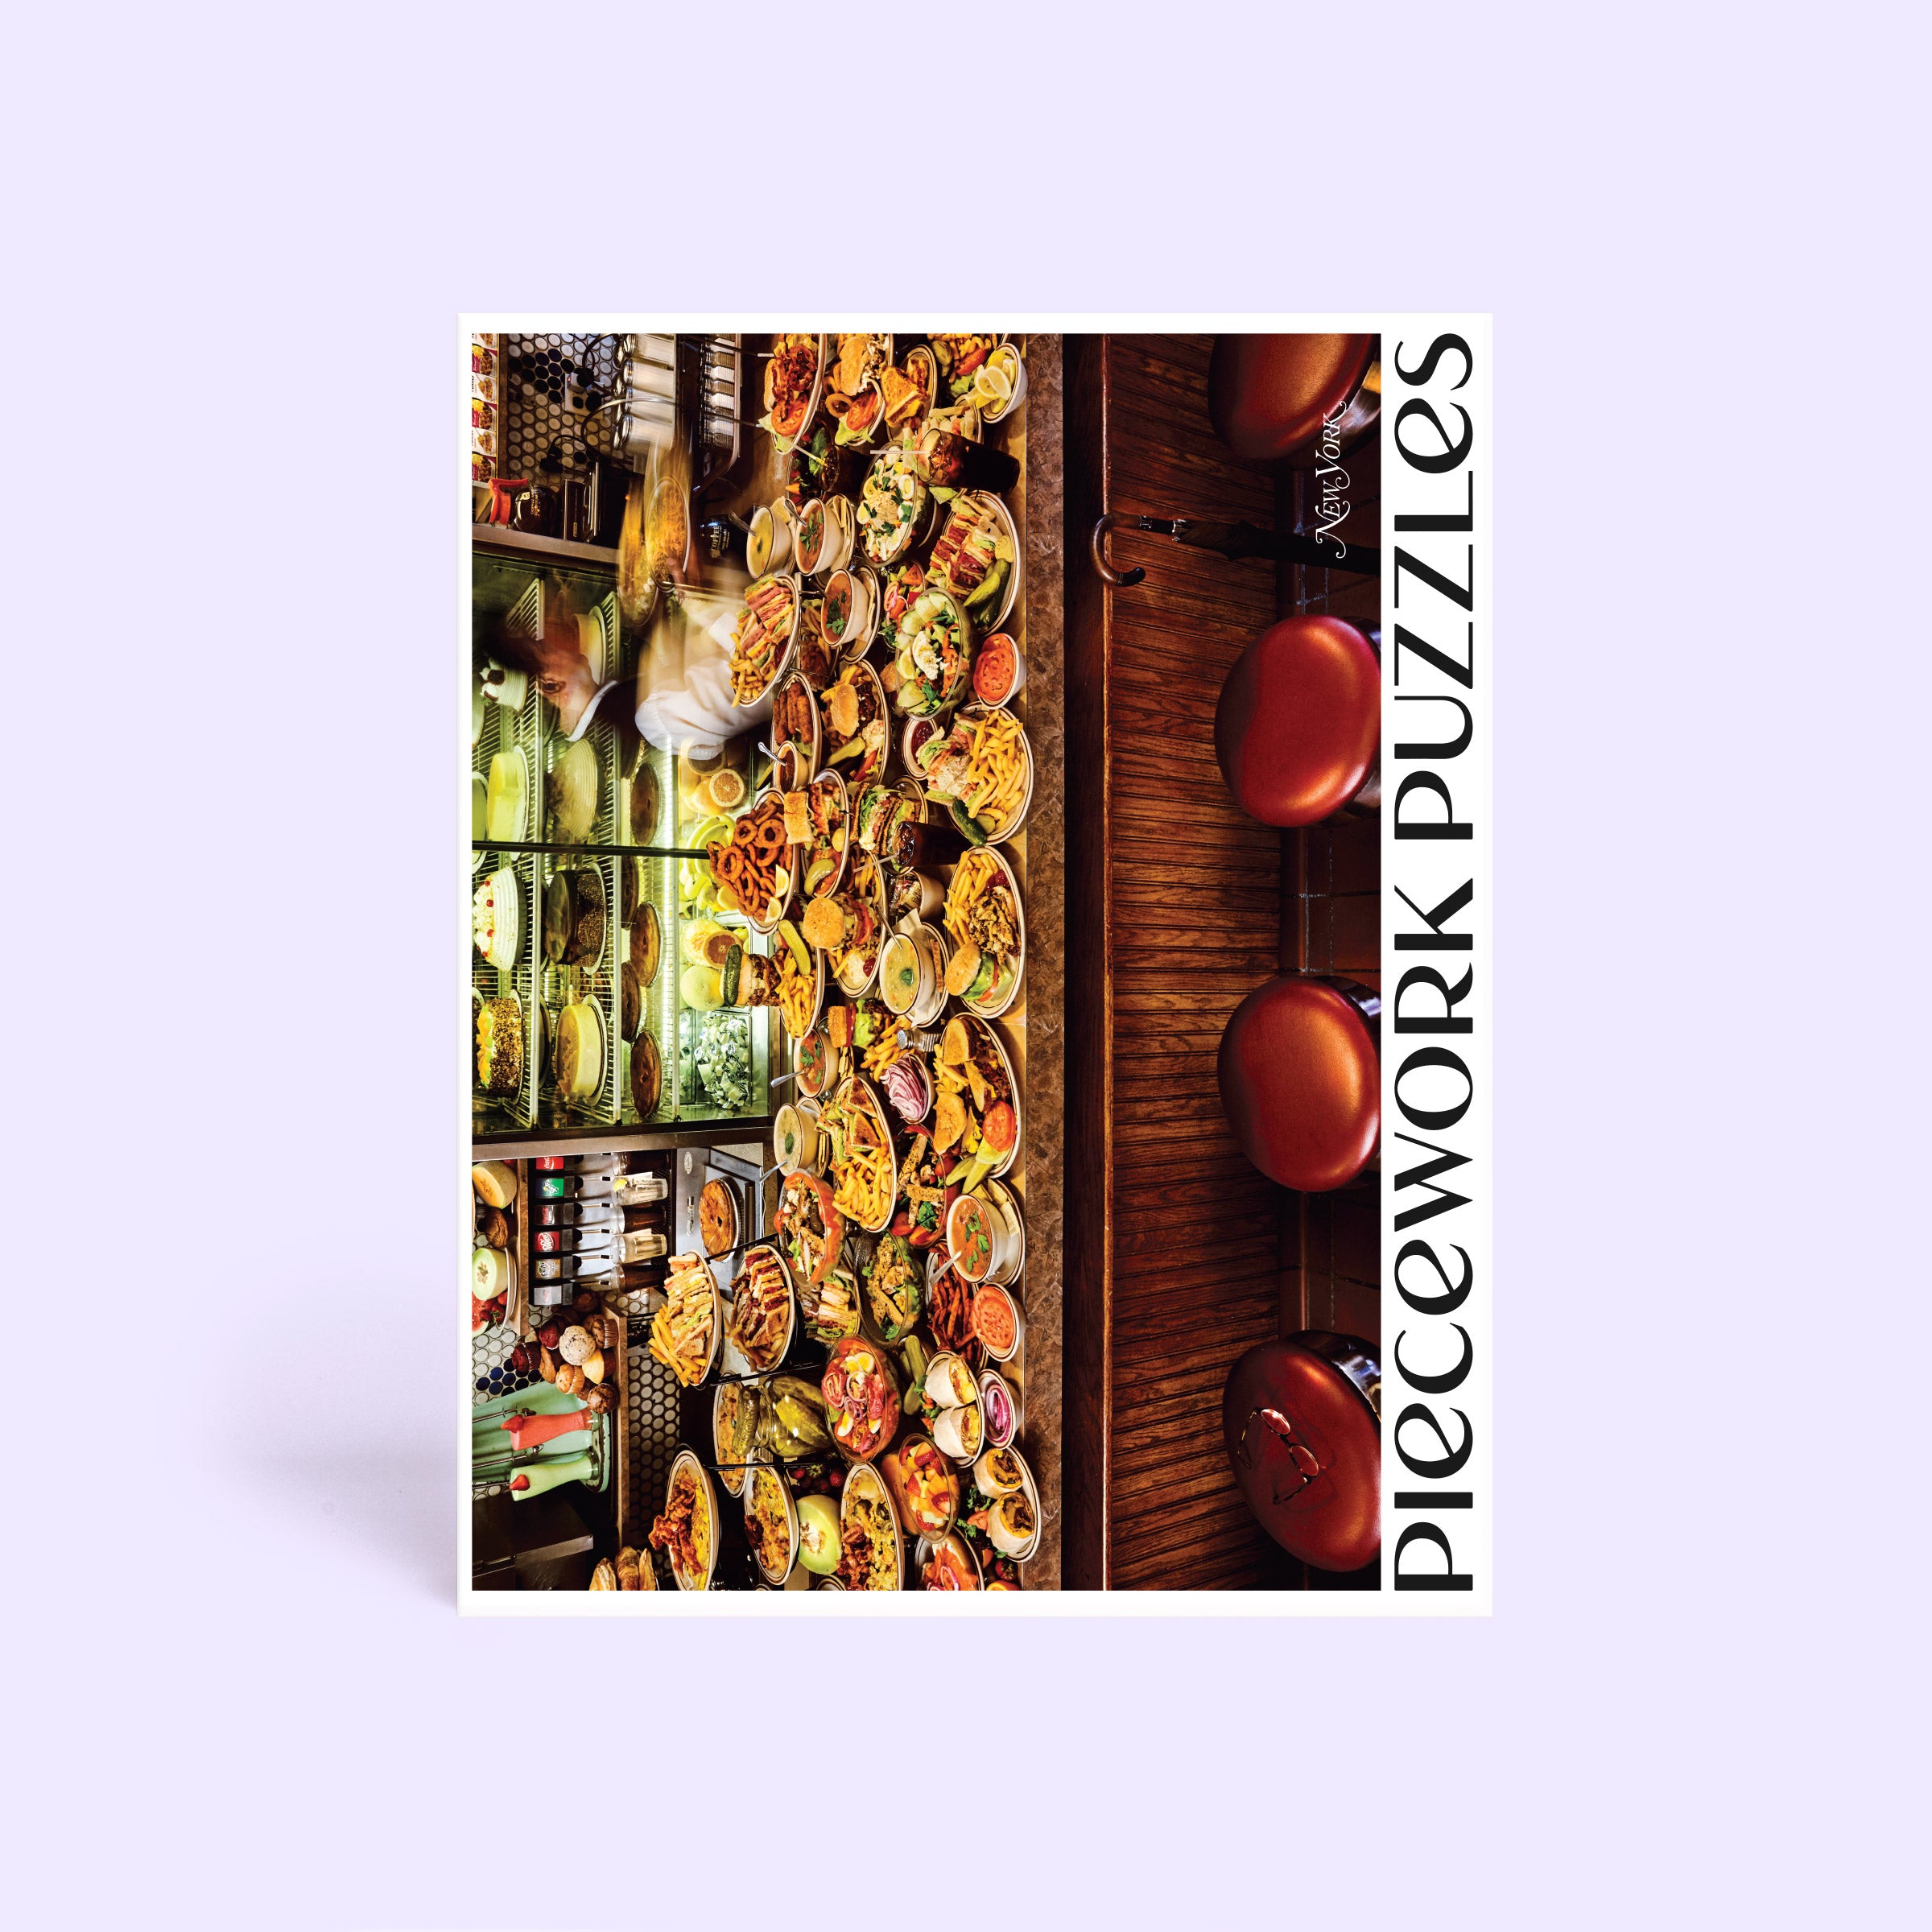 The New York Diner – Piecework Puzzles